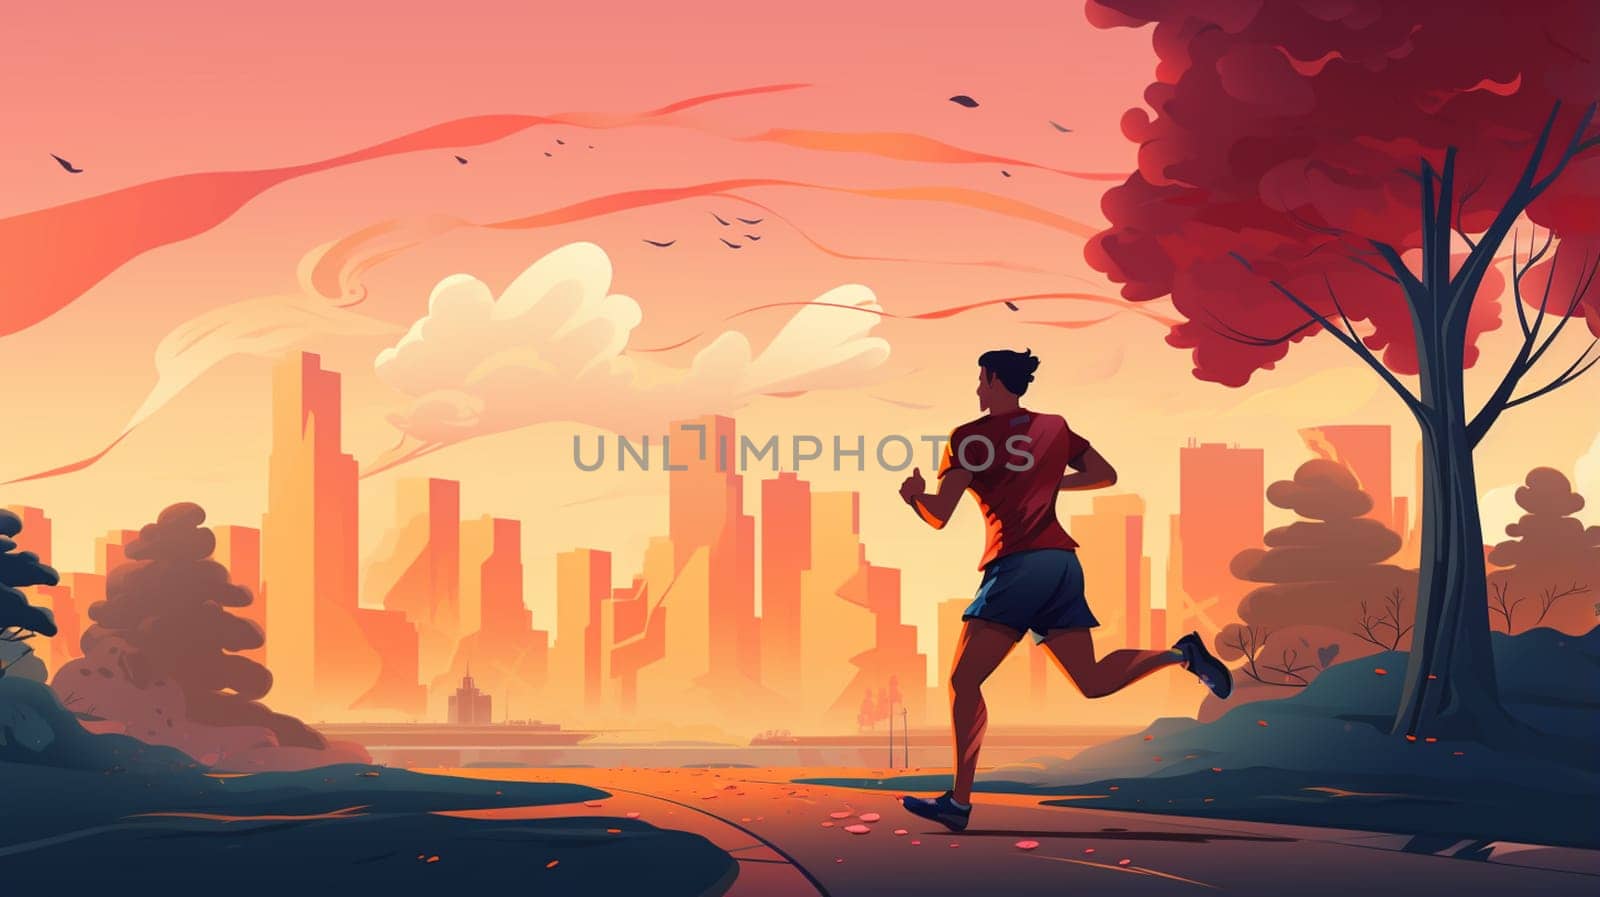 Jogging man on outdoor sport with city view, vertical illustration by Andelov13